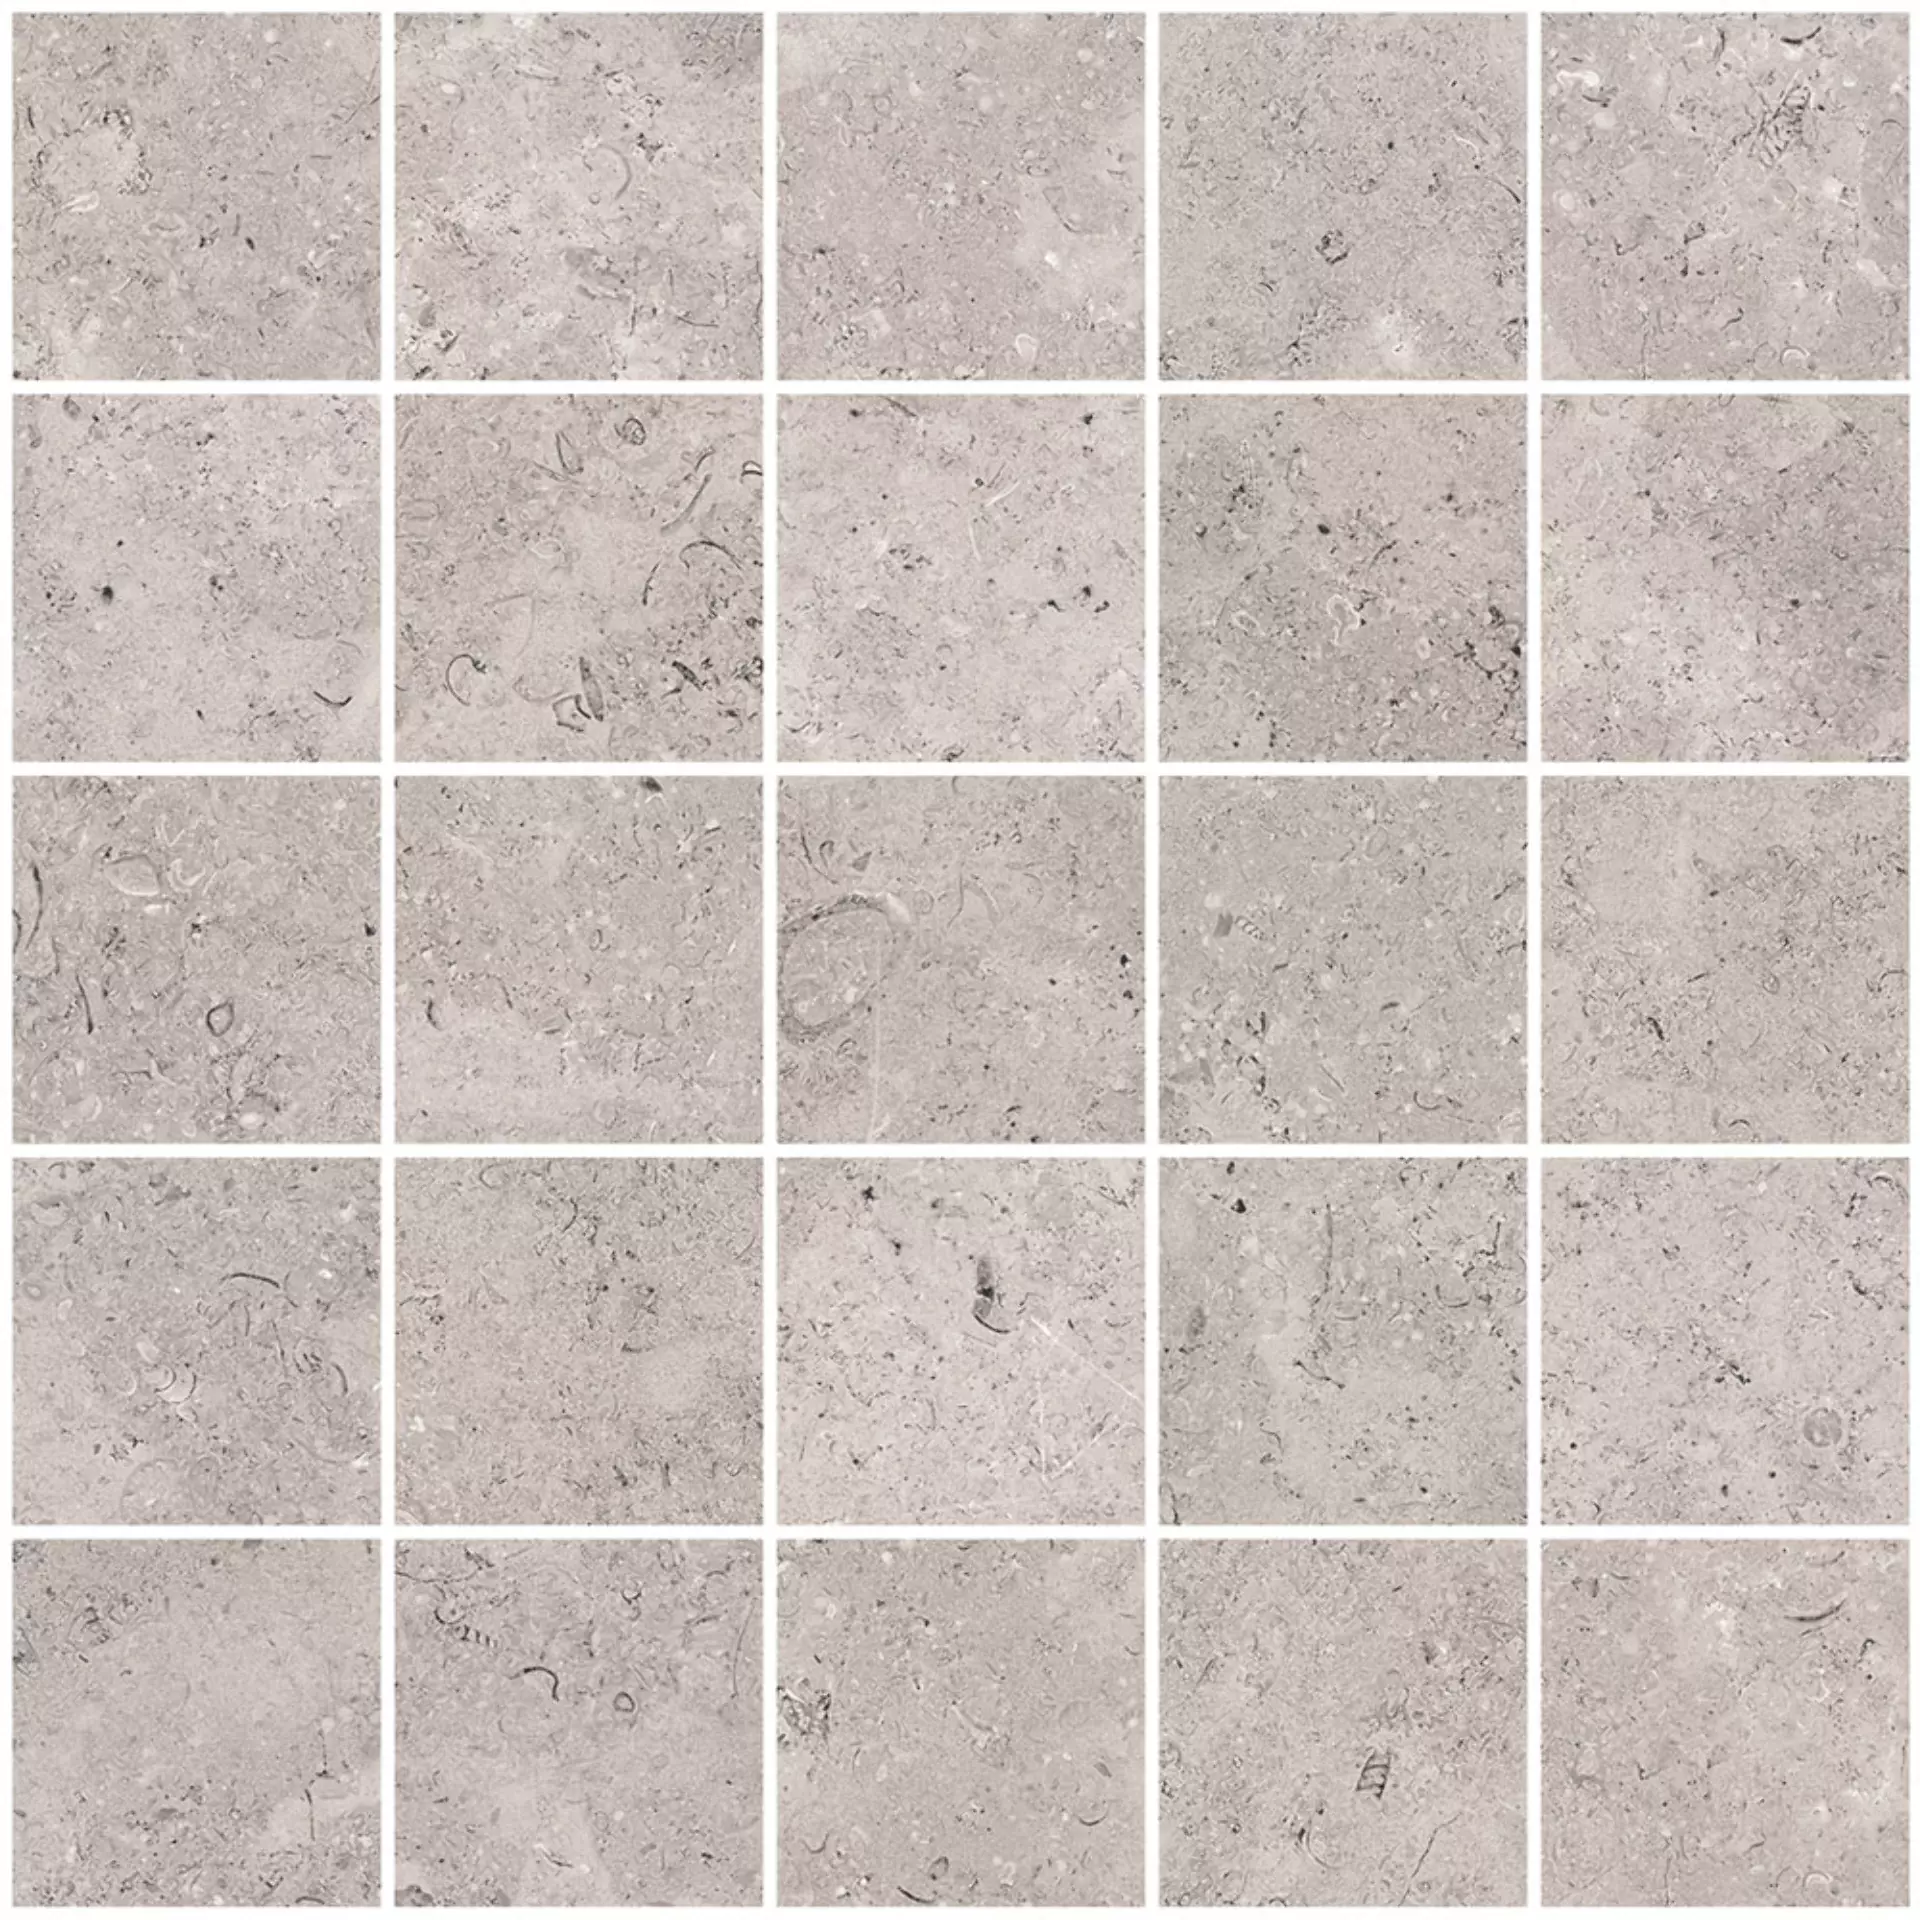 Sant Agostino Unionstone 2 Cedre Grey Natural Mosaic CSAMCEGR30 30x30cm rectified 10mm